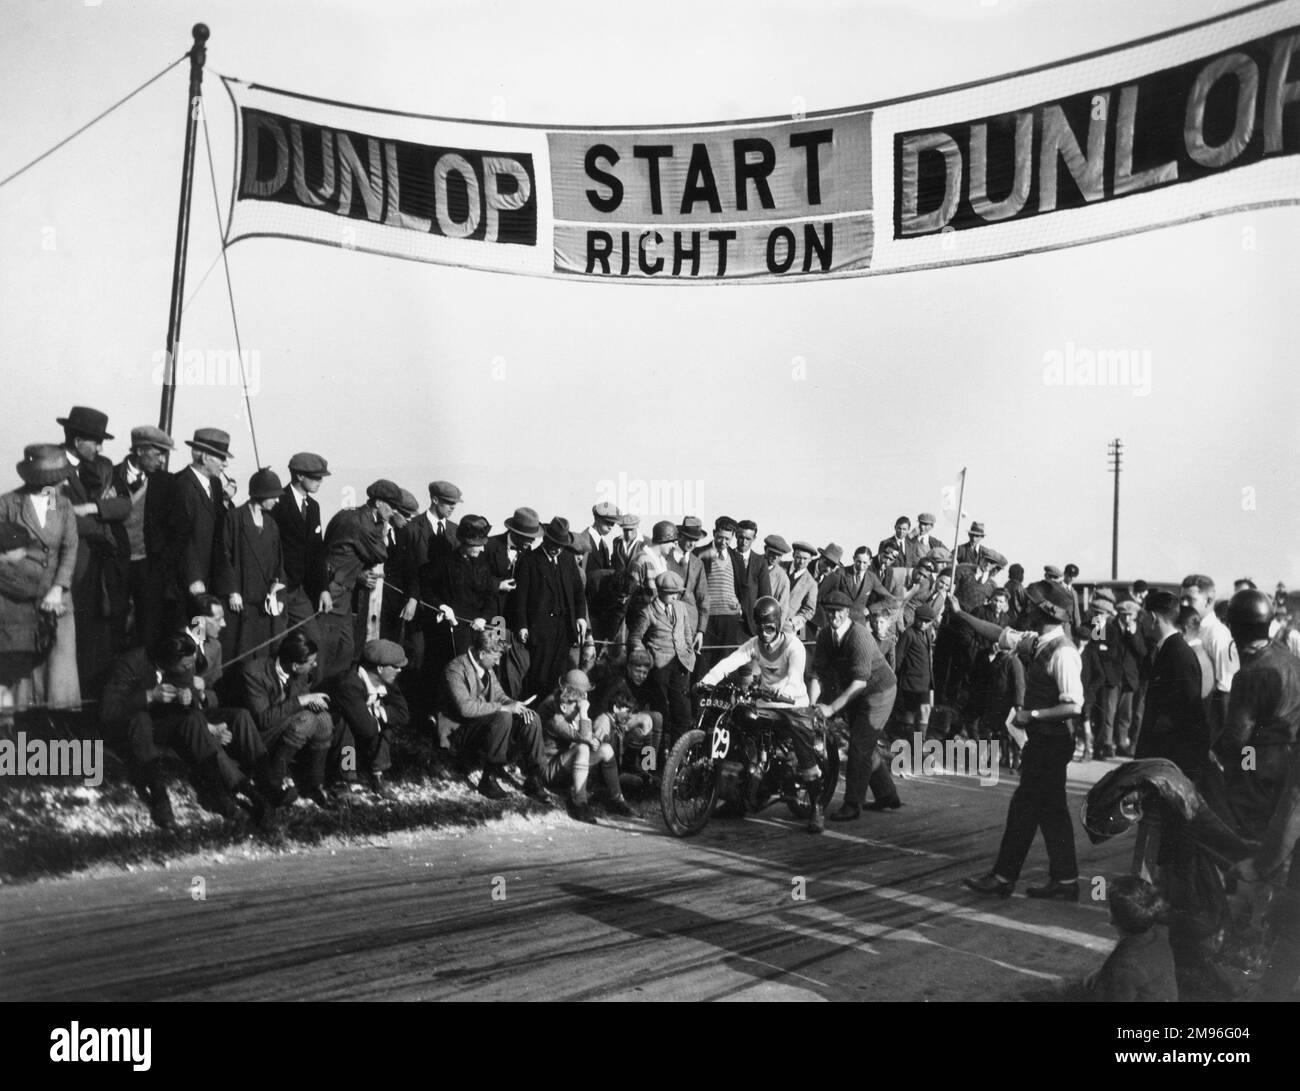 Crowds gather around a racetrack in Lewes, Sussex as man on a motorcycle prepares to be pushed off to begin the race, under a start banner indicating the sponsor, Dunlop. The Lewes Speed Trials were organised by Brighton & Hove Motor Cycle and Light Car Club. Stock Photo